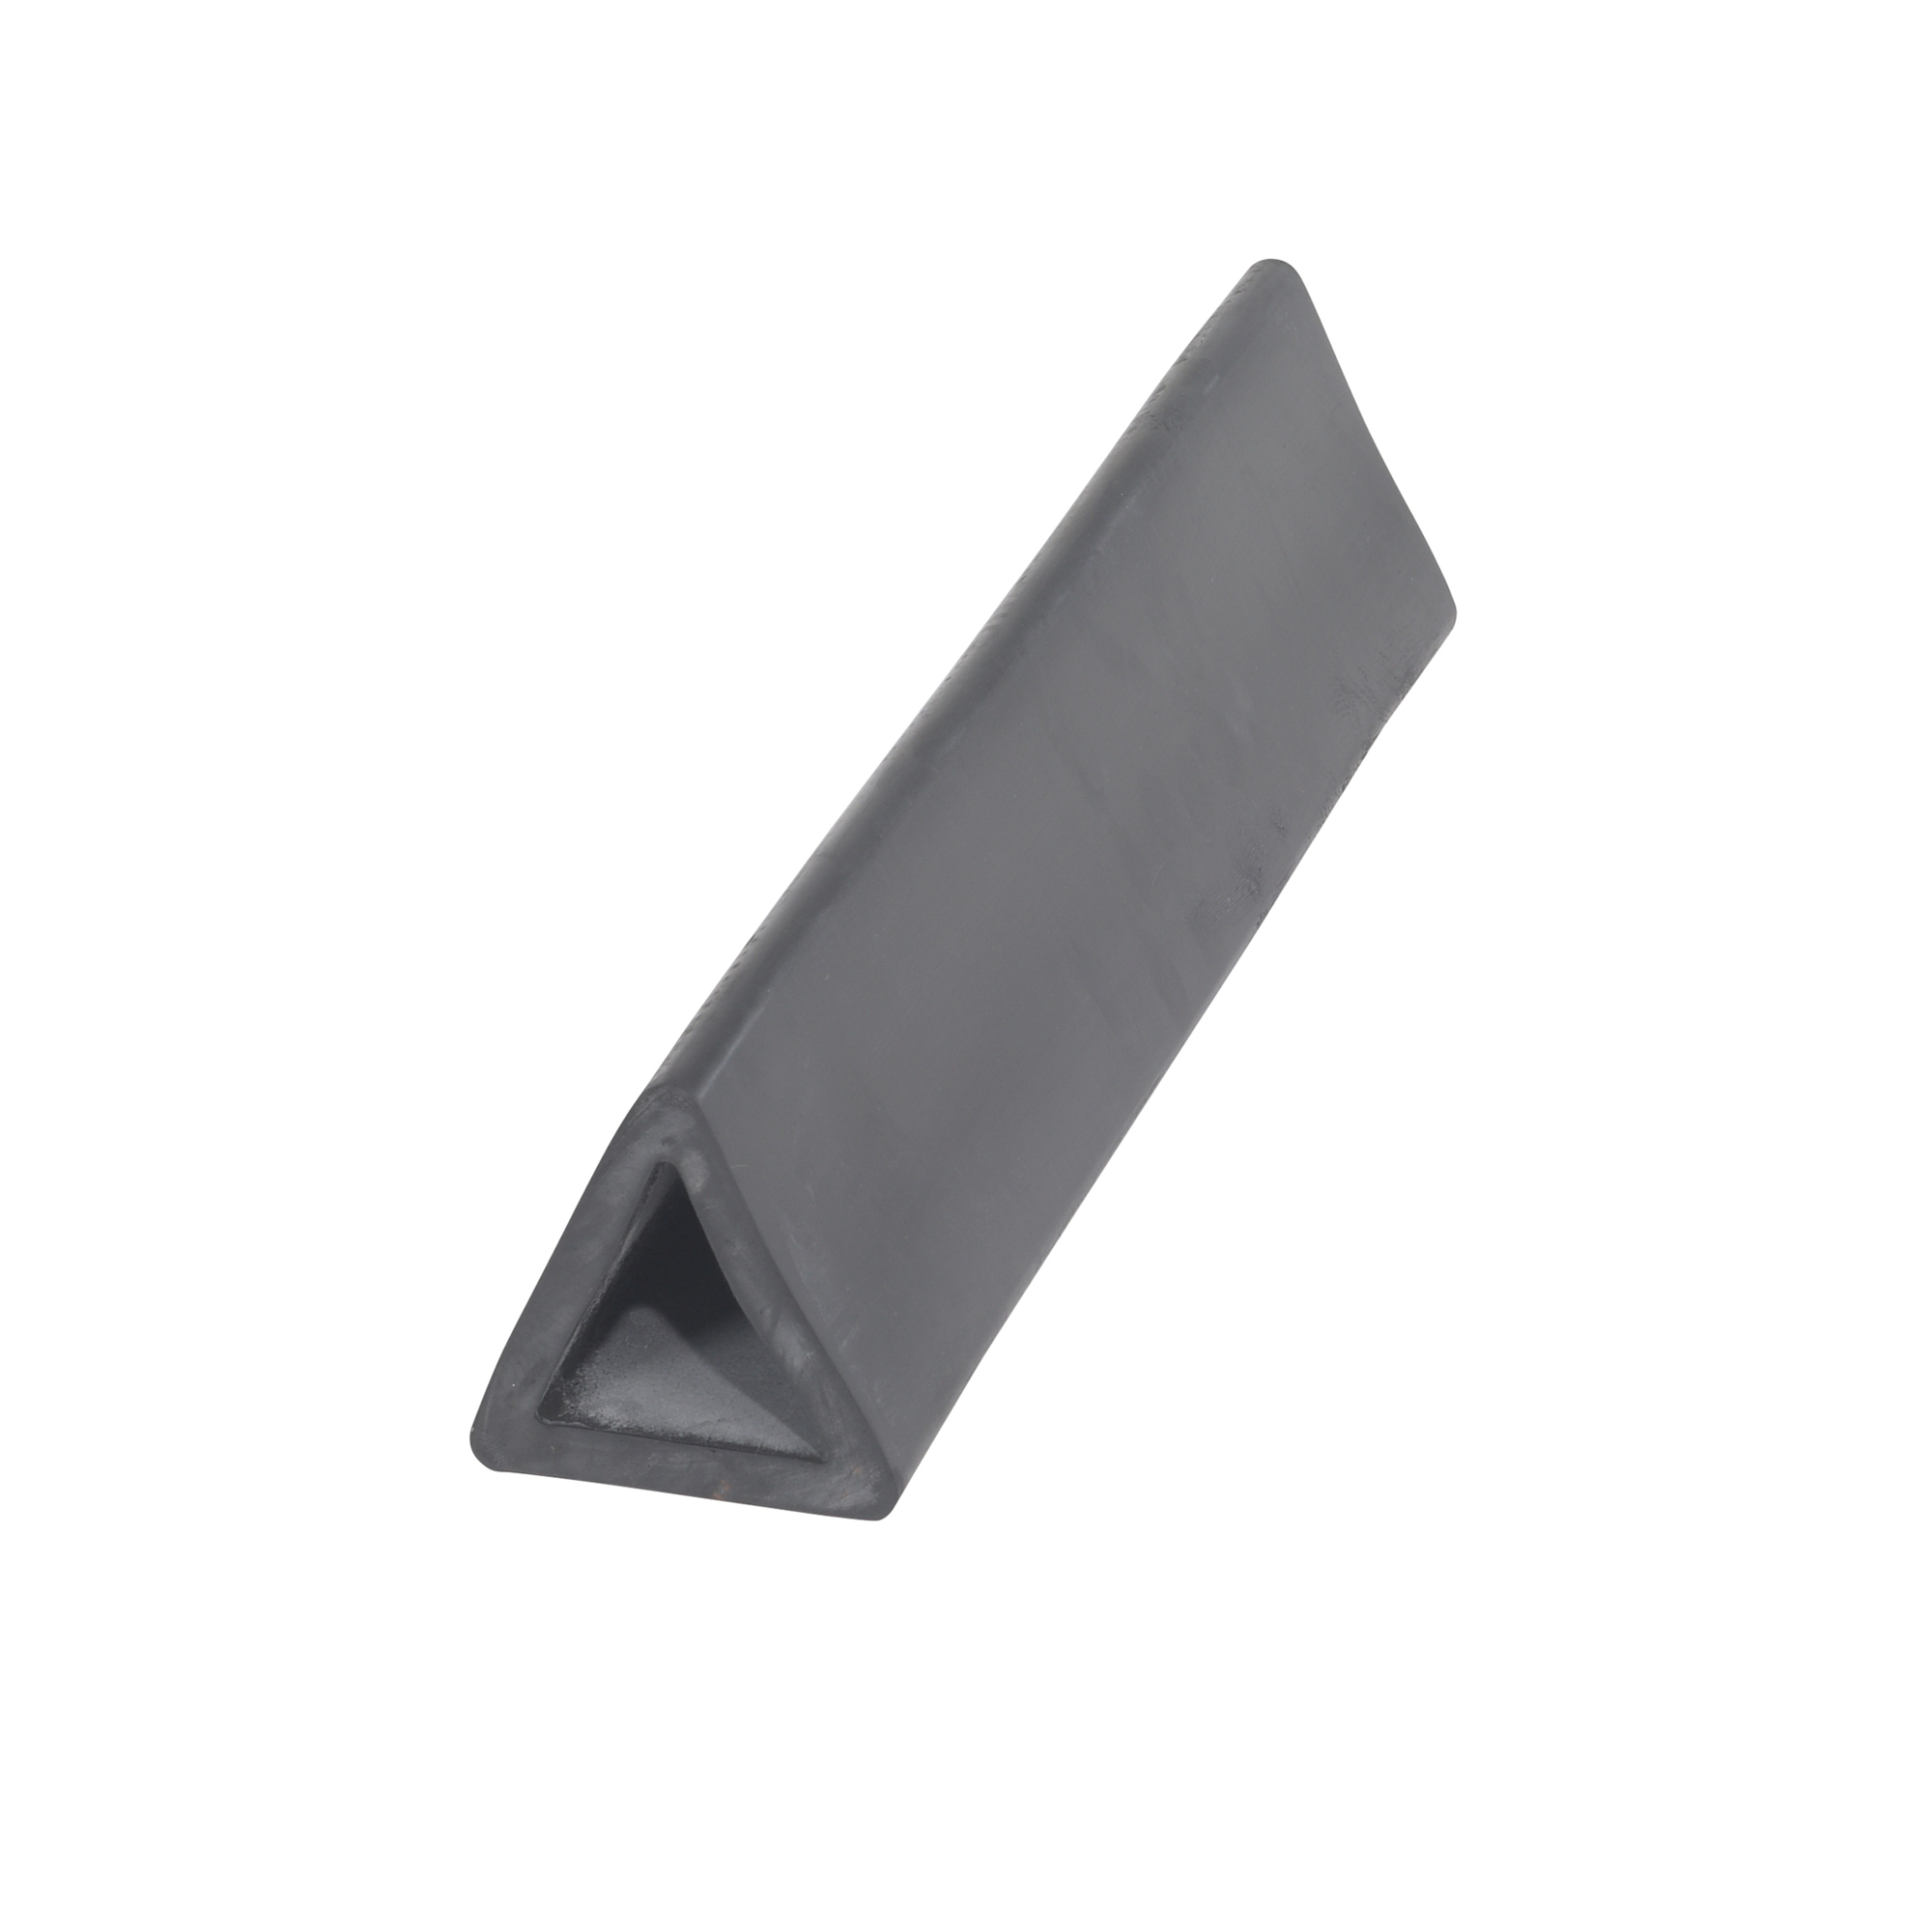 Vestil Extruded Triangular Bumper Product Style Molded Length 18 In